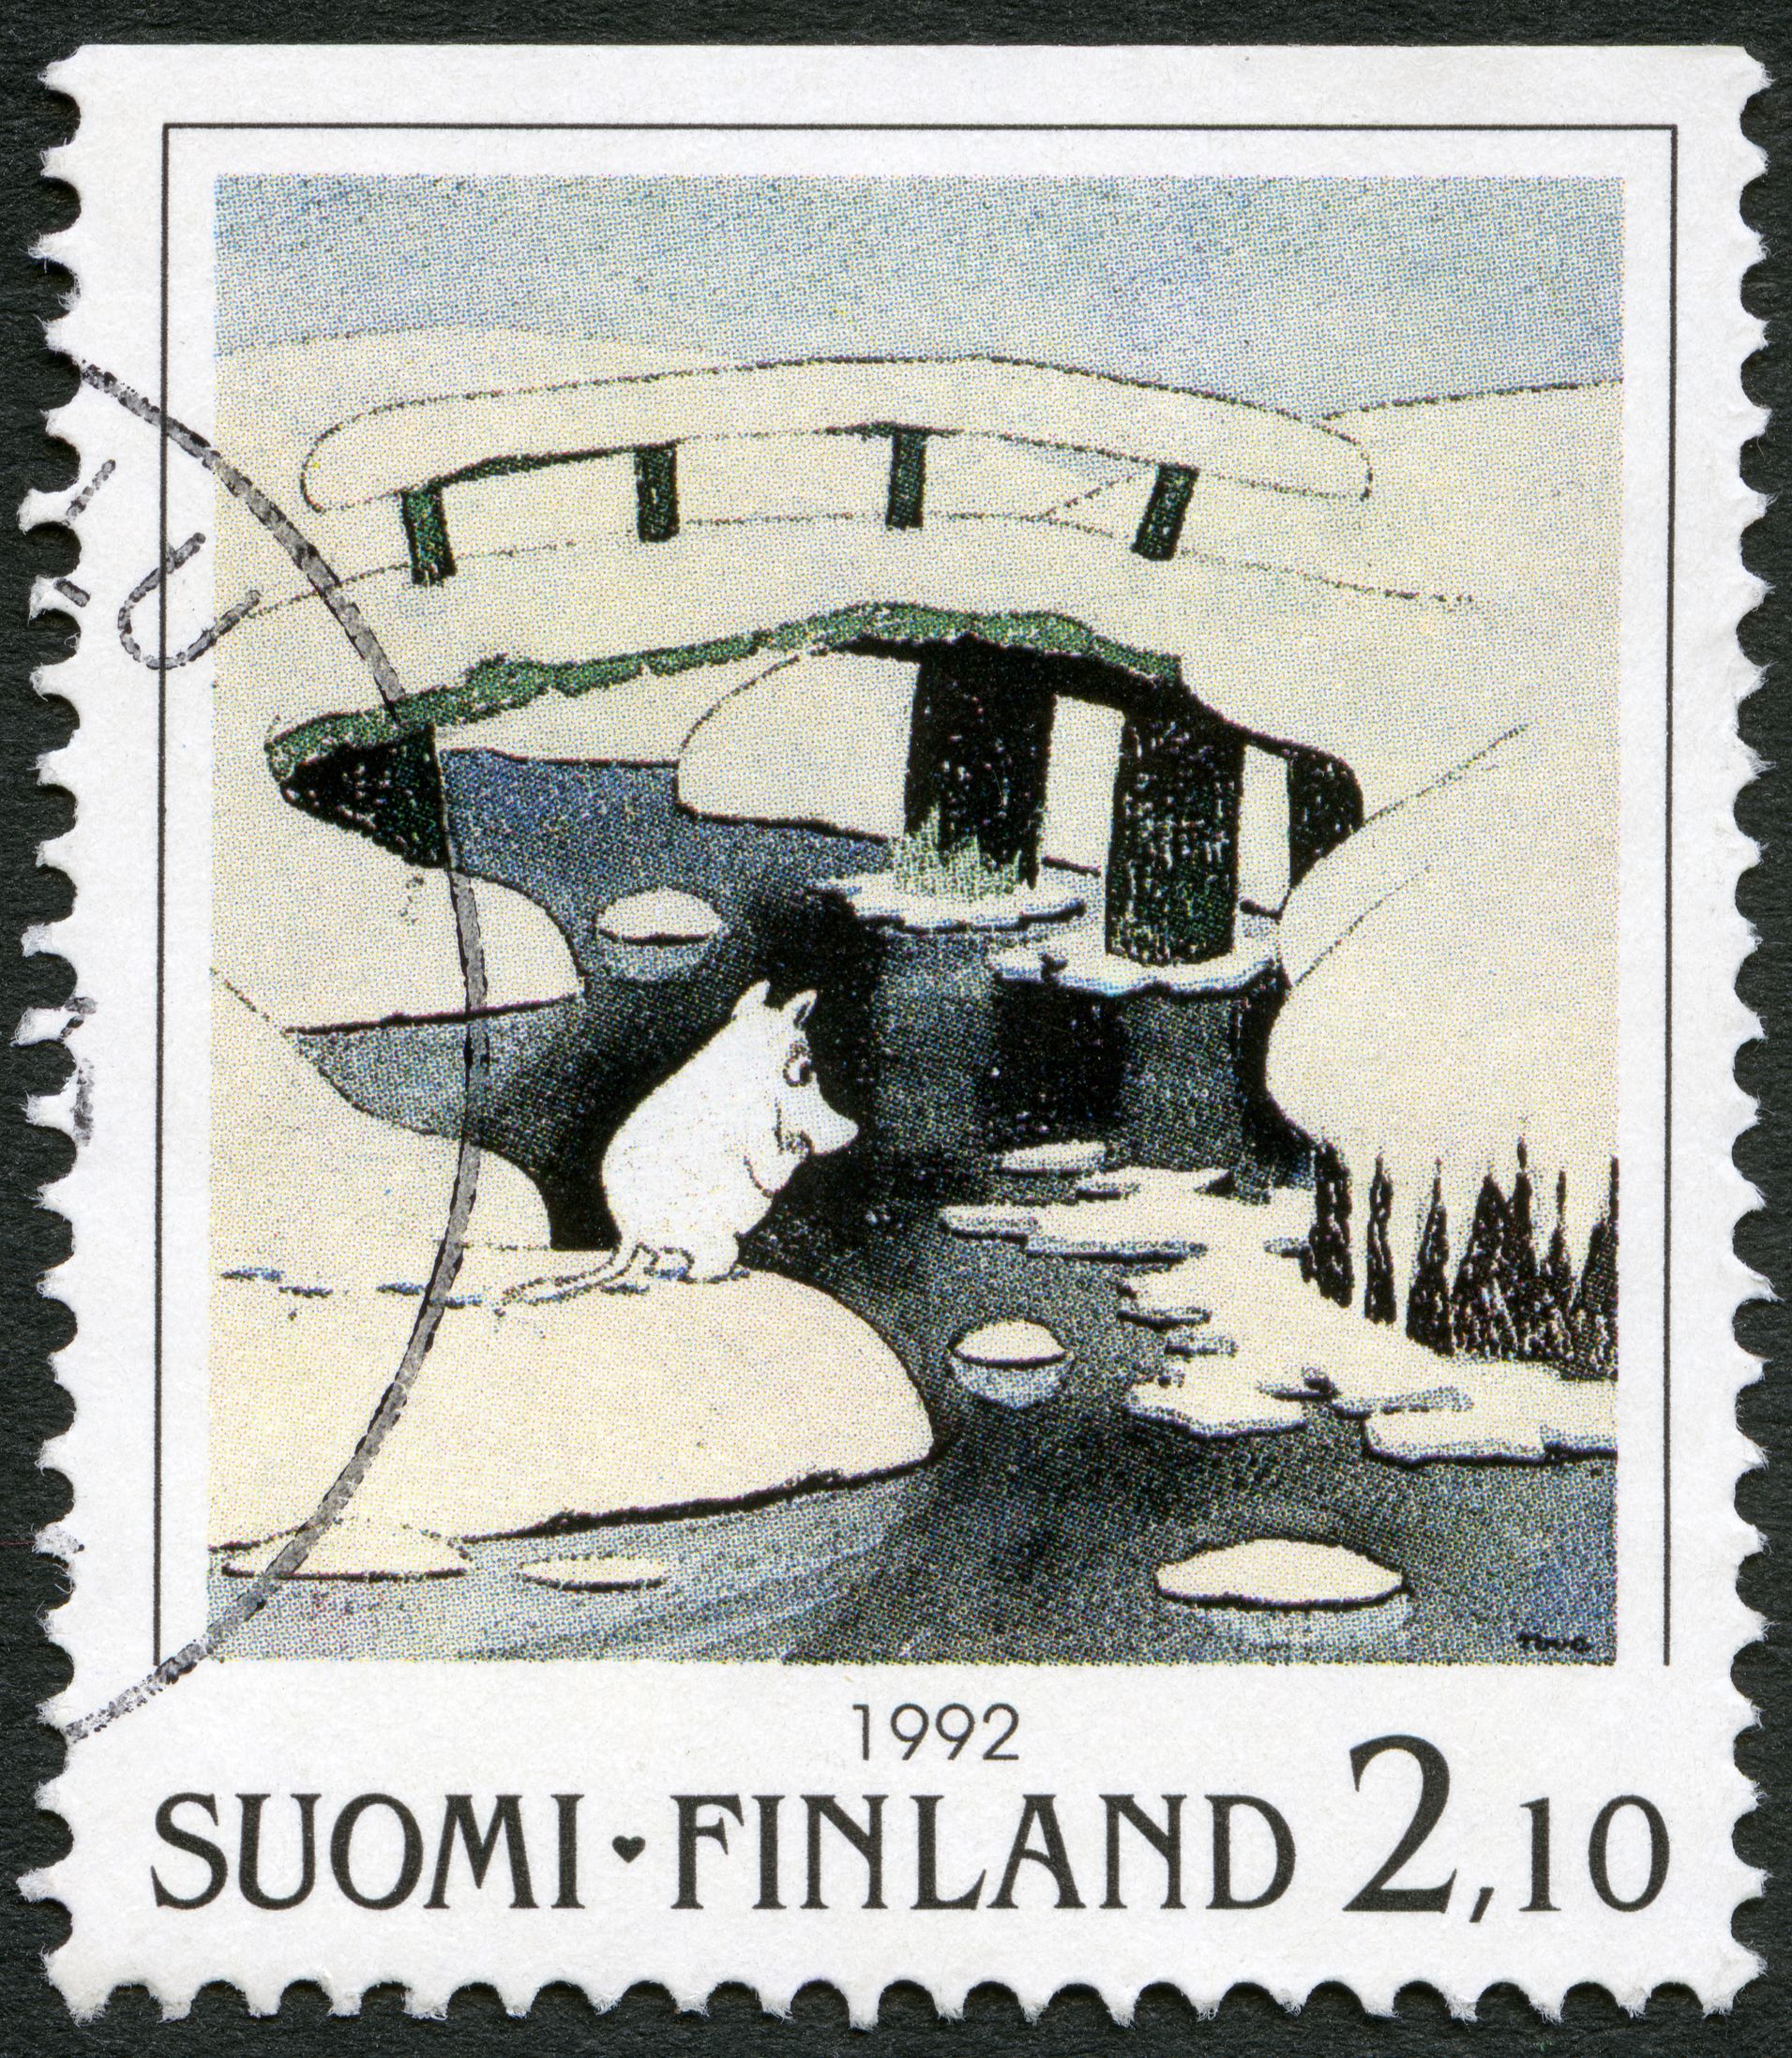 Figure 9.0: Stamp circa 1992 printed in Finland, showing the main Moomin cartoon character overlooking a melting river during the winter, looking worried. By Tove Jansson: 